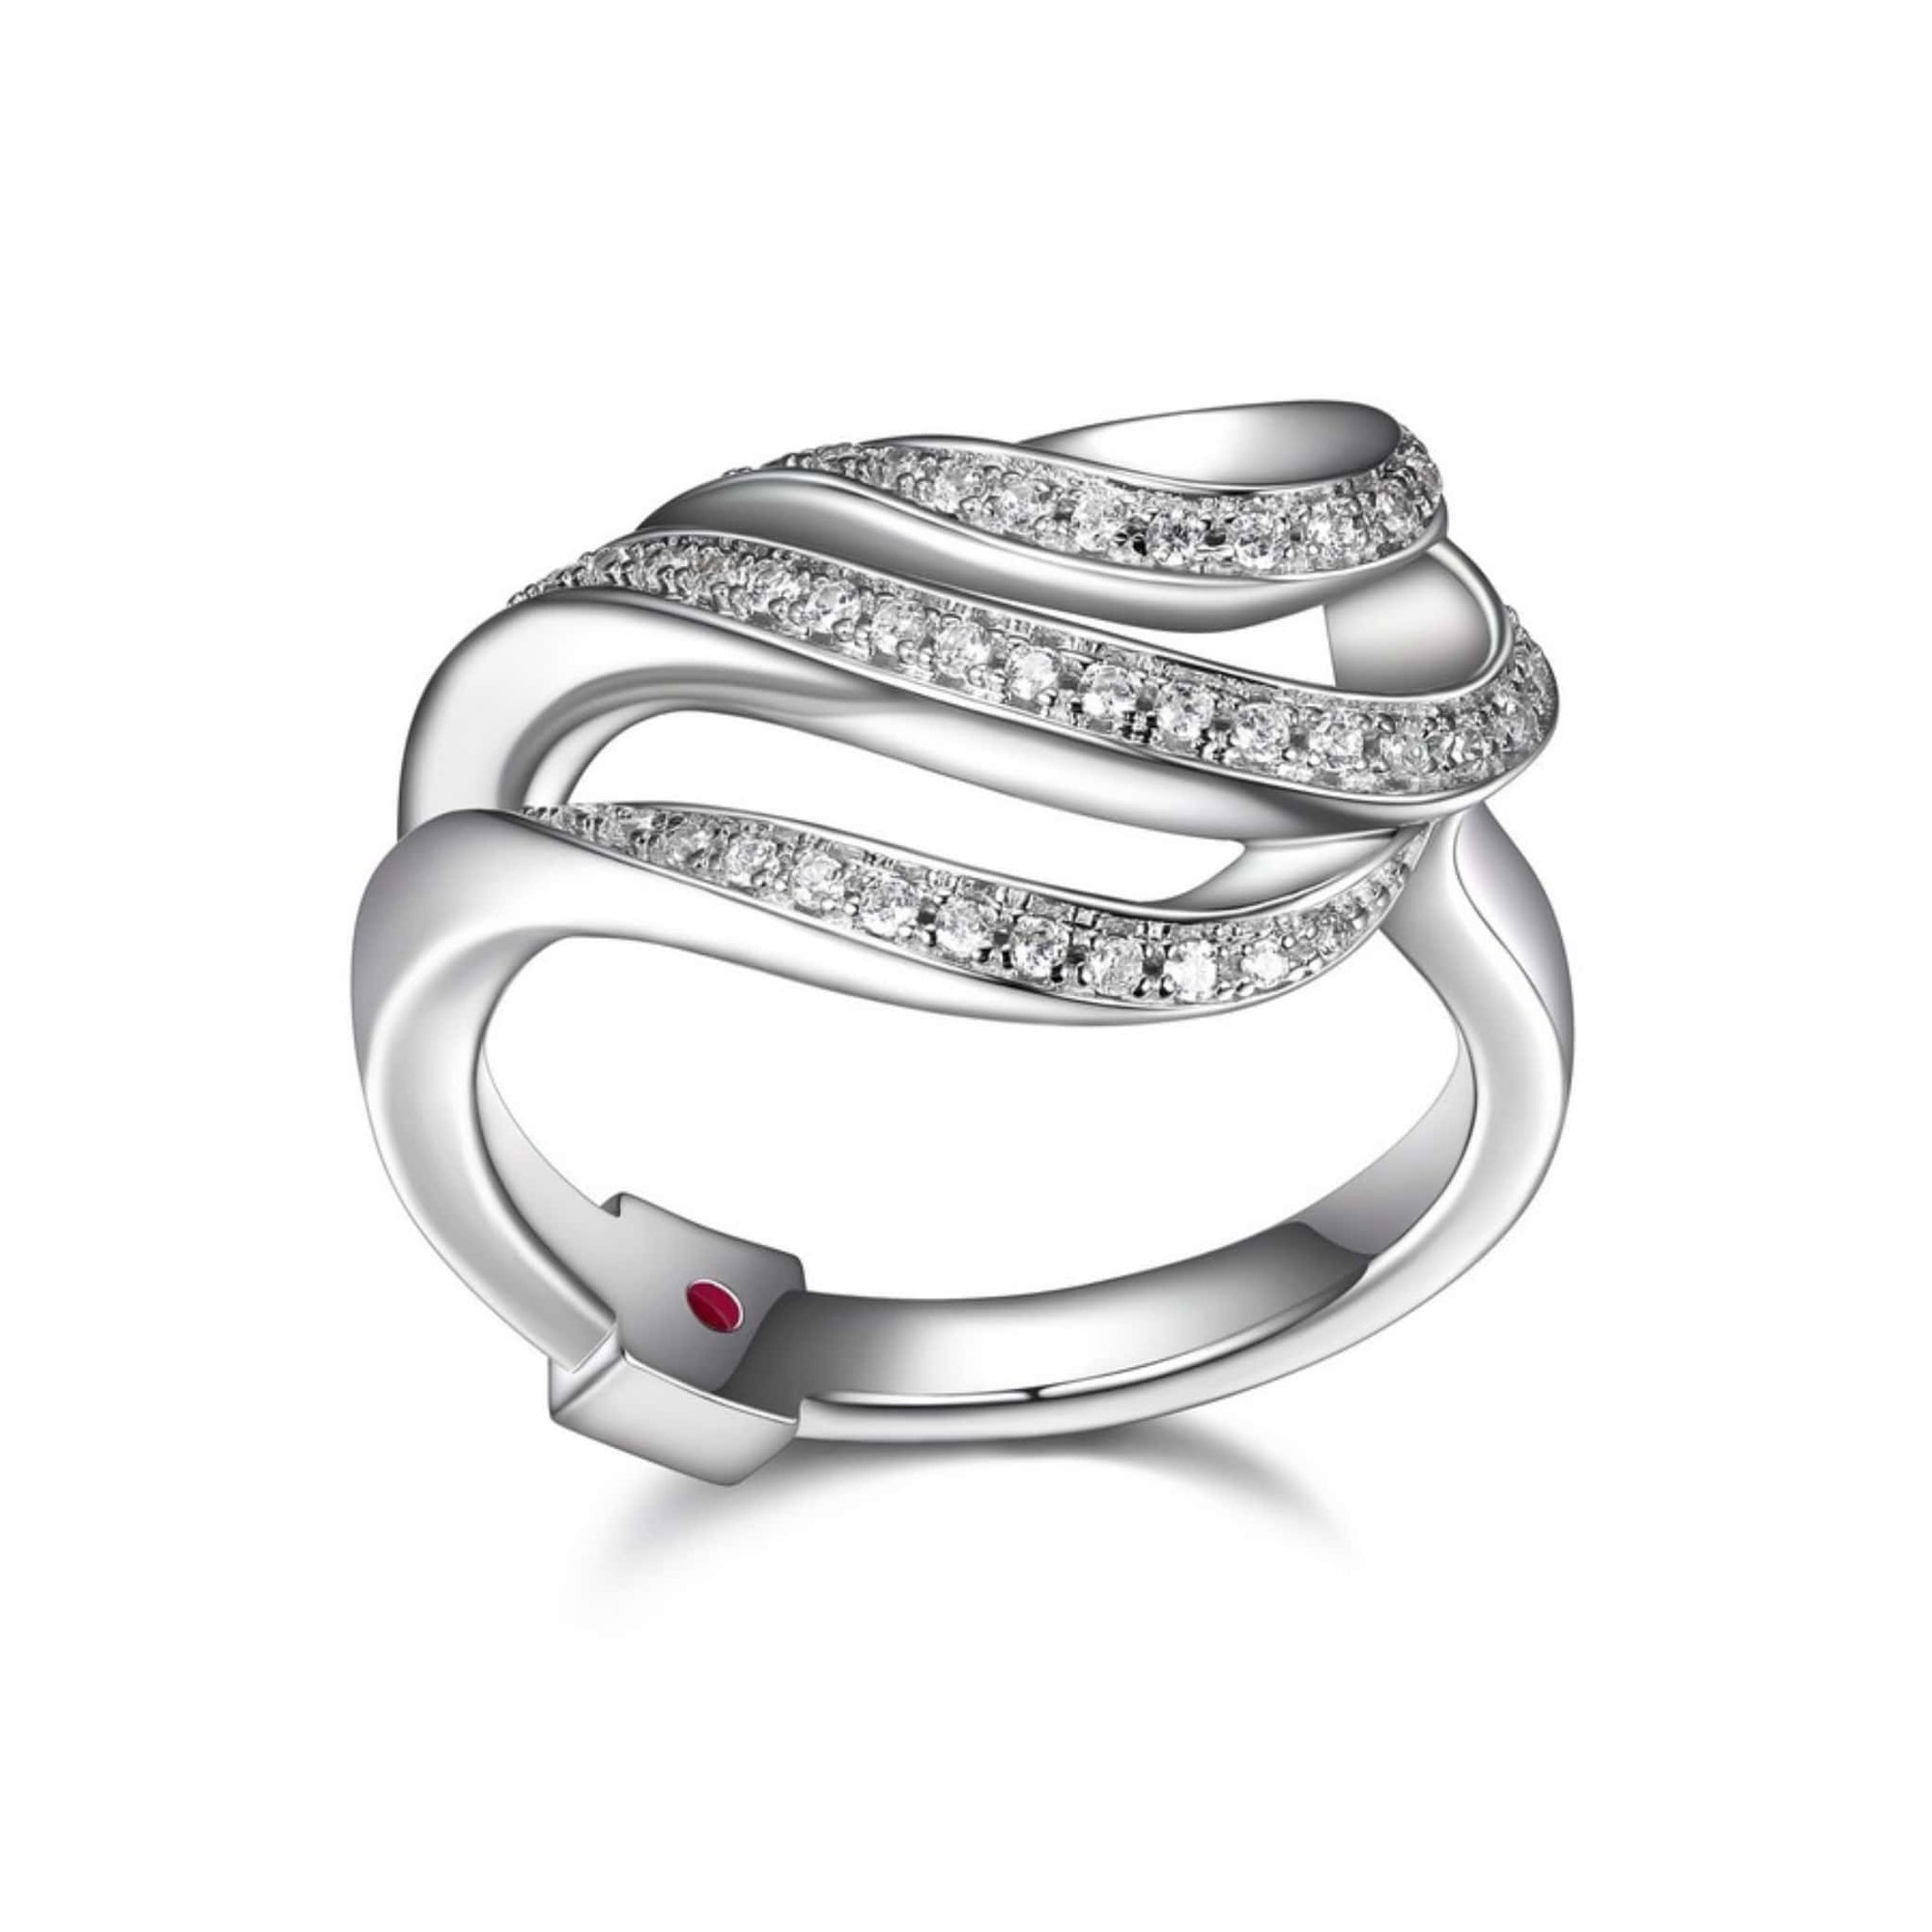 ELLE Moon Shadow Layered CZ Silver Ring at Arman's Jewellers